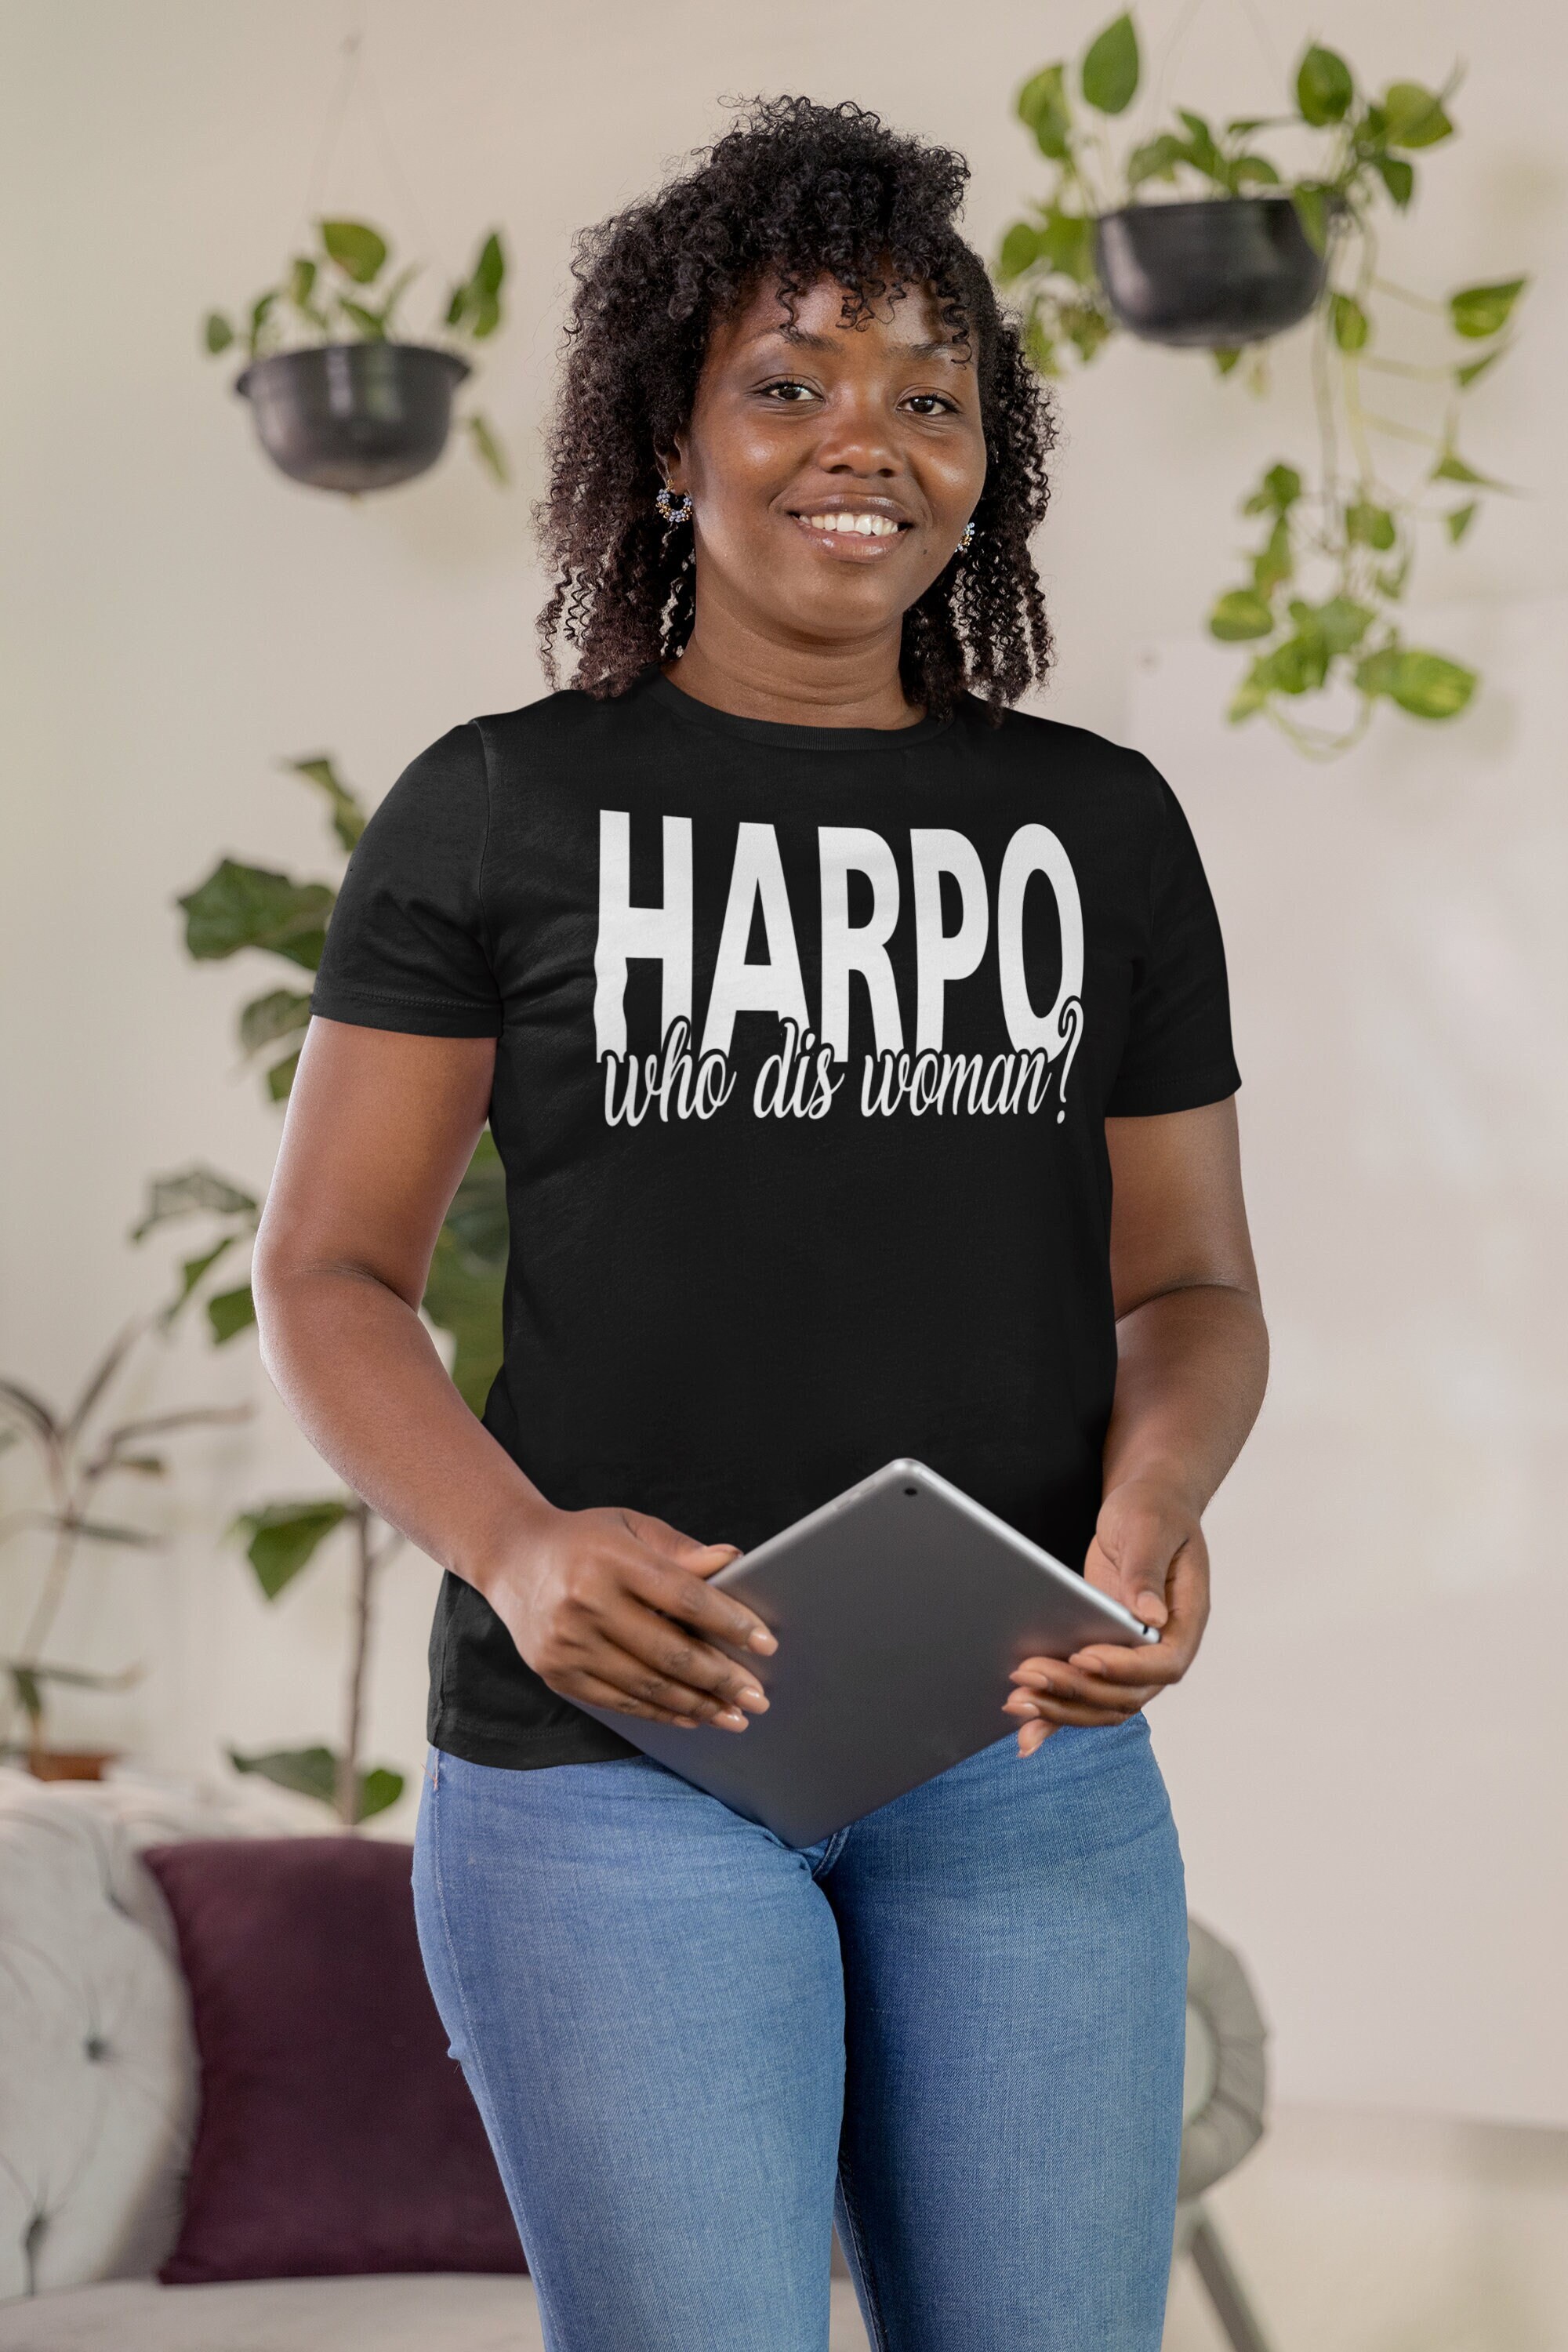 T-shirt the Color Purple 80s Movie Harpo Who Dis Woman Graphic Tee - Etsy